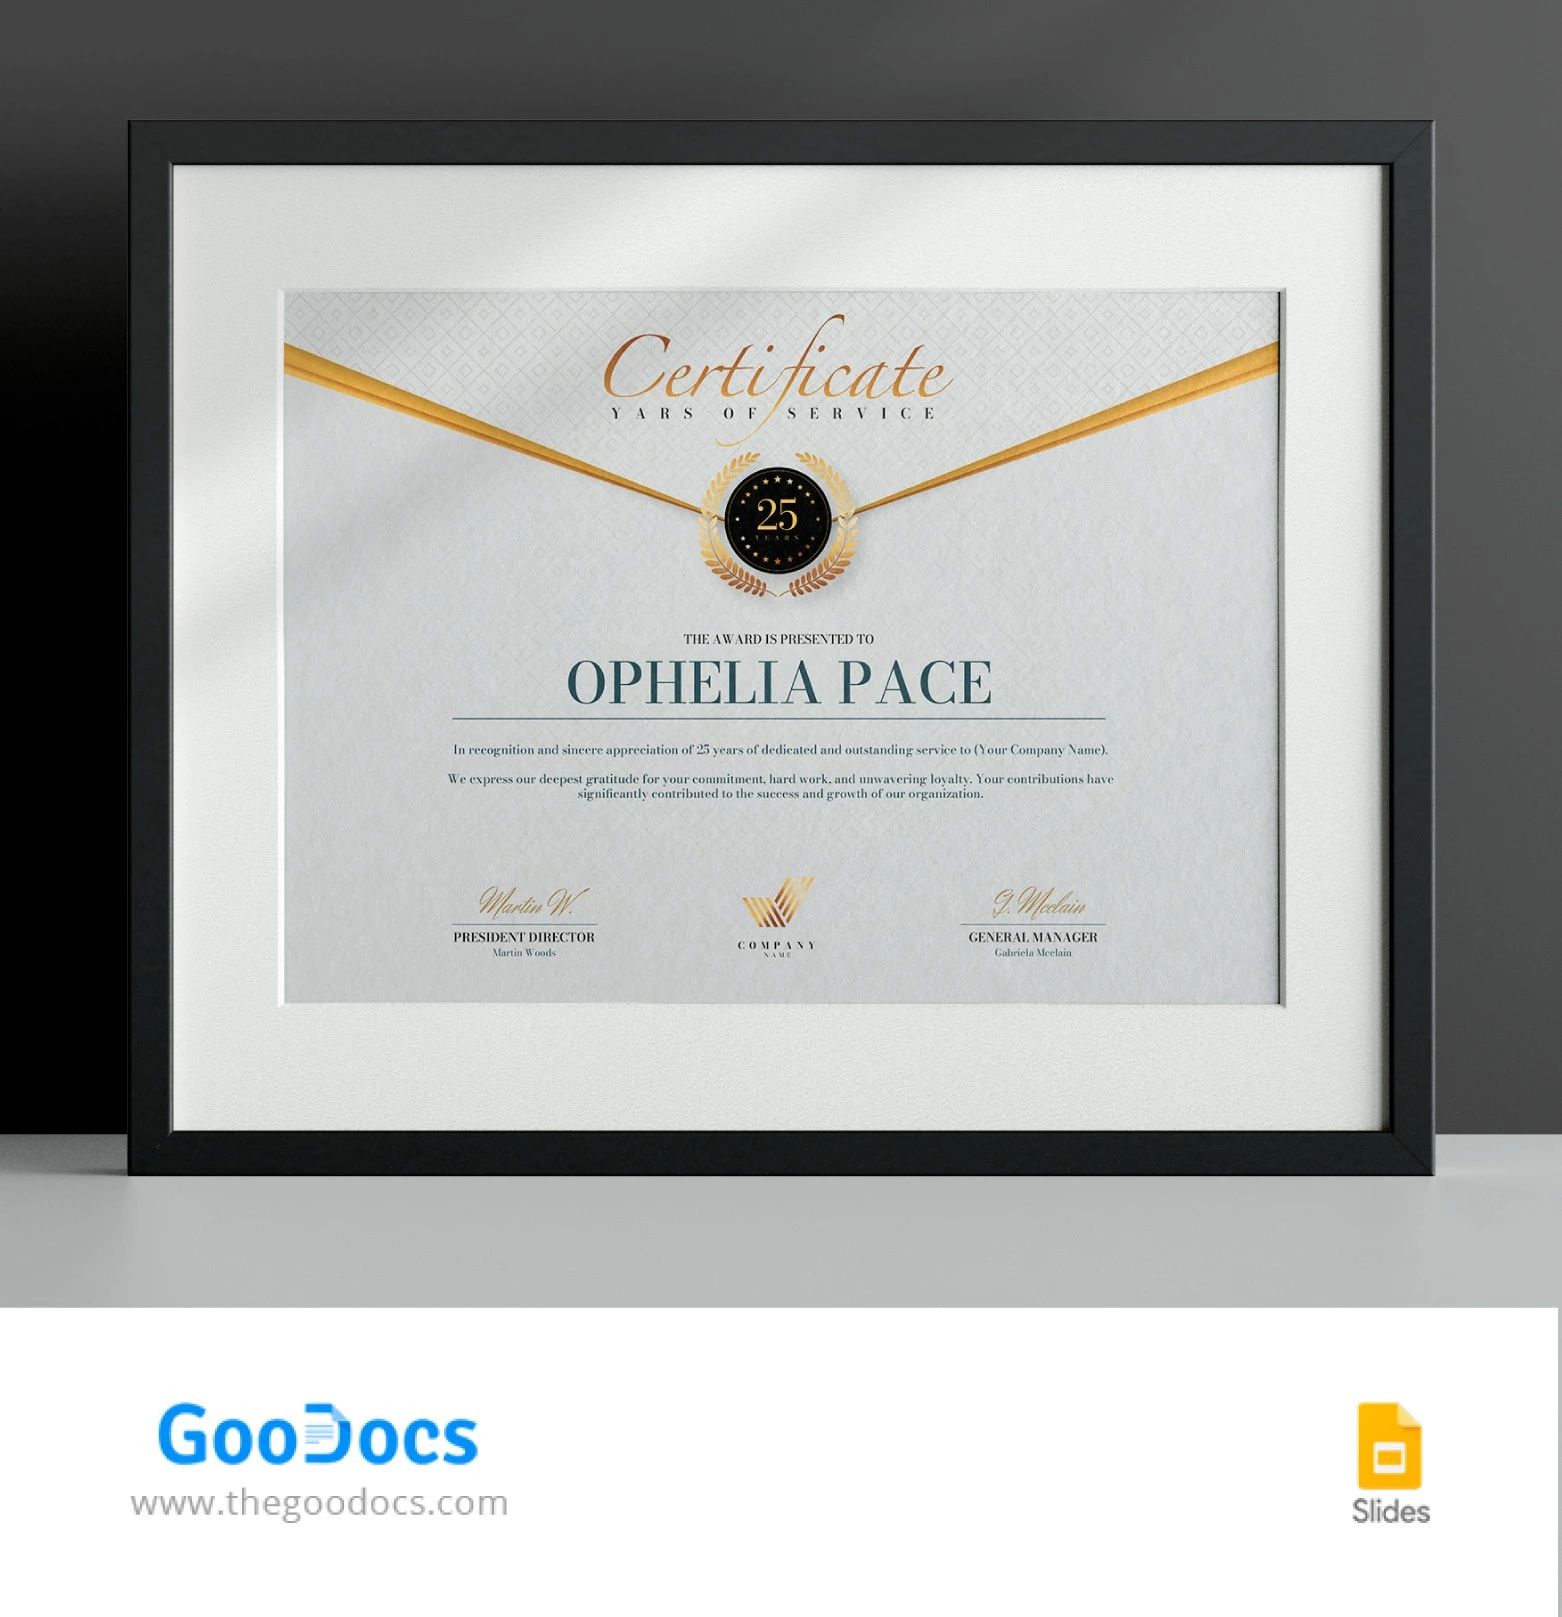 Years of Service Award Certificate - free Google Docs Template - 10068341